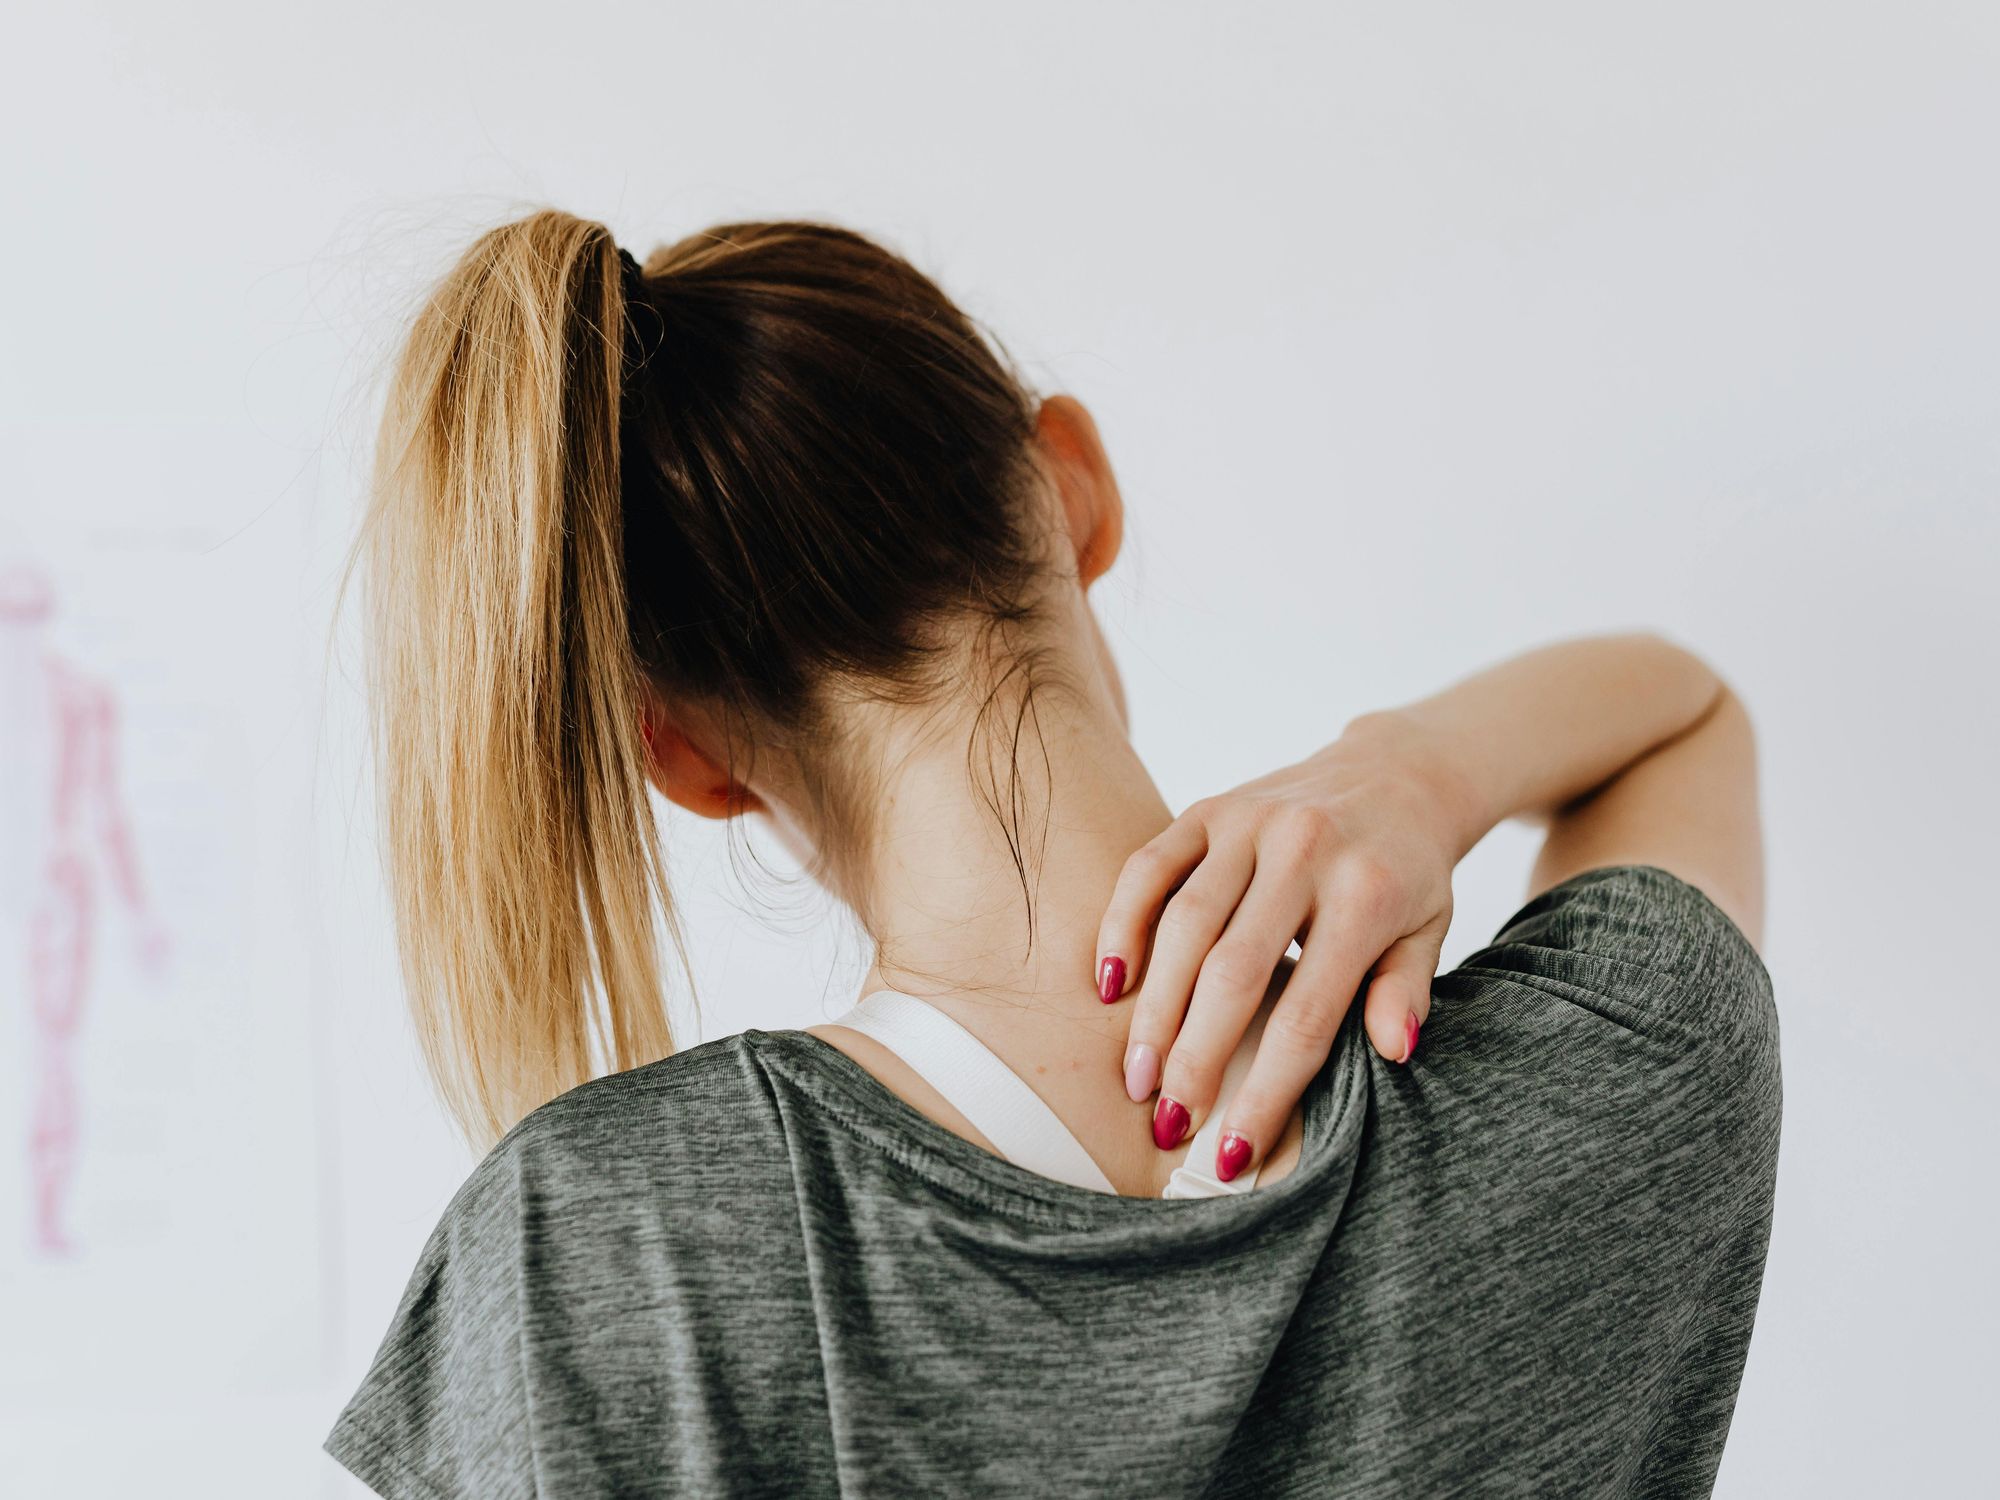 A woman with her back to the camera stretches her neck while massaging the muscles in her back